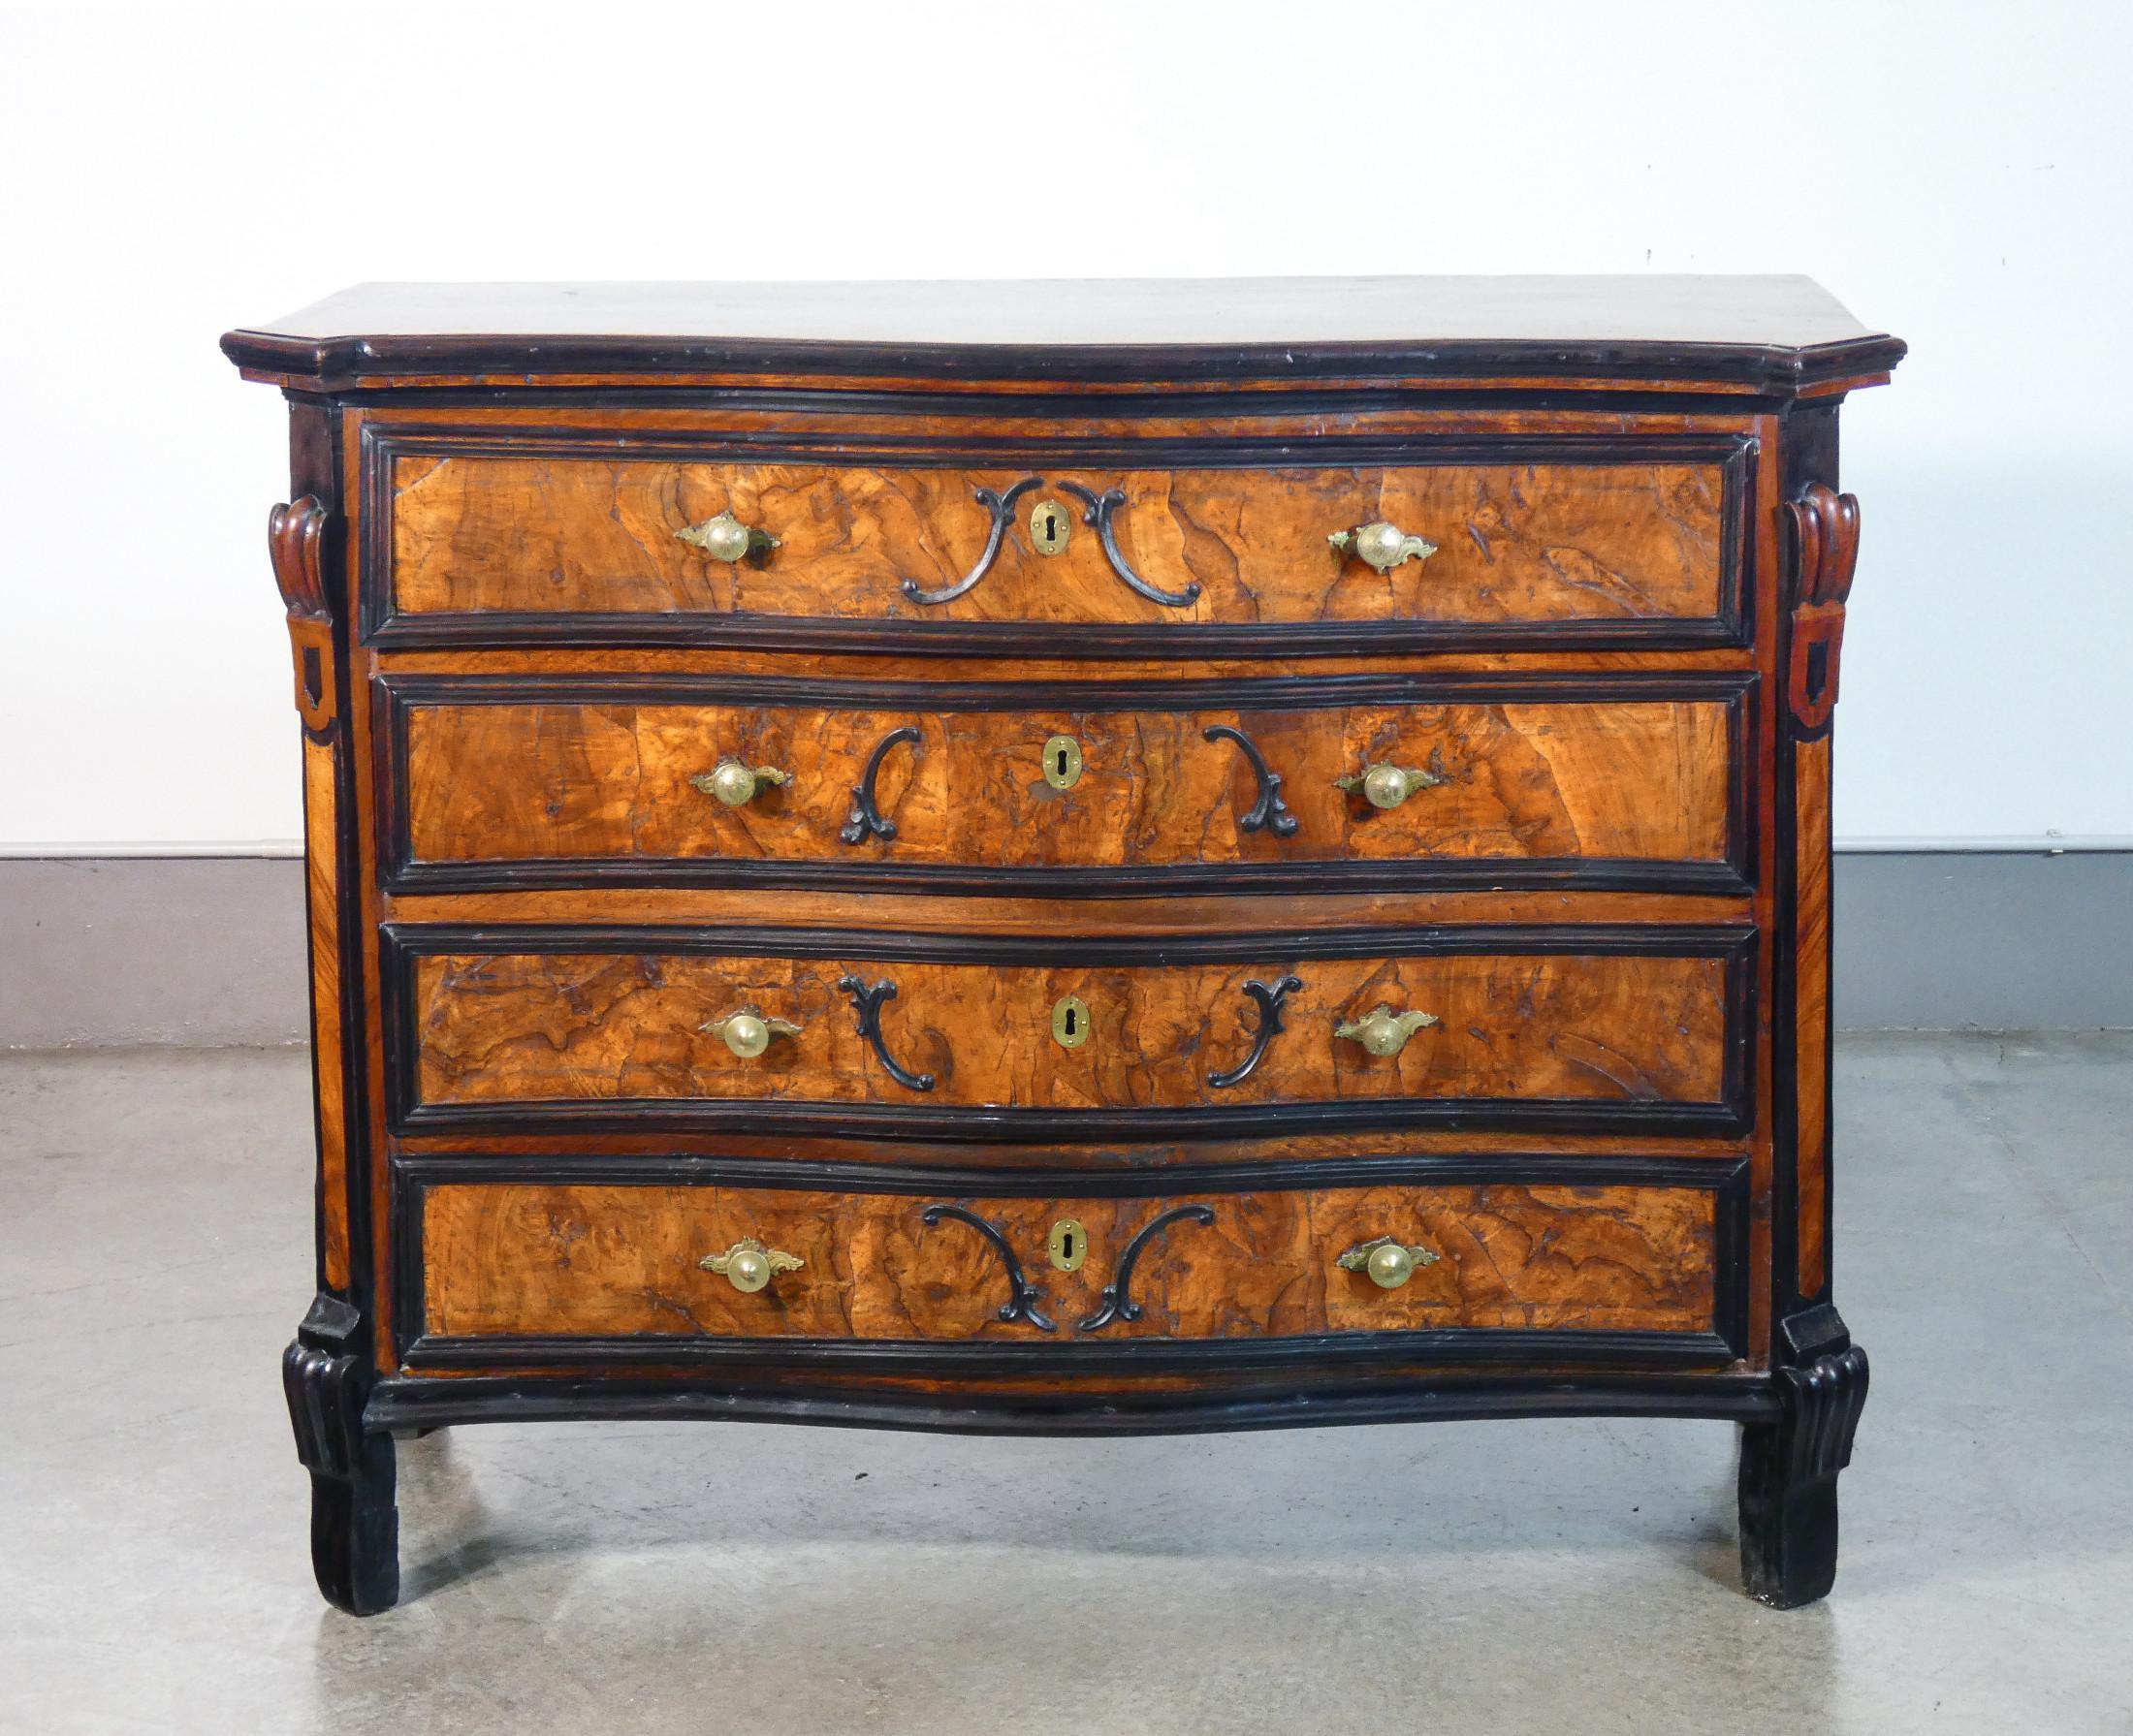 Italian Original Louis XIV Chest of Drawers Walnut Wood and Briar Italy, Early 18th C. For Sale